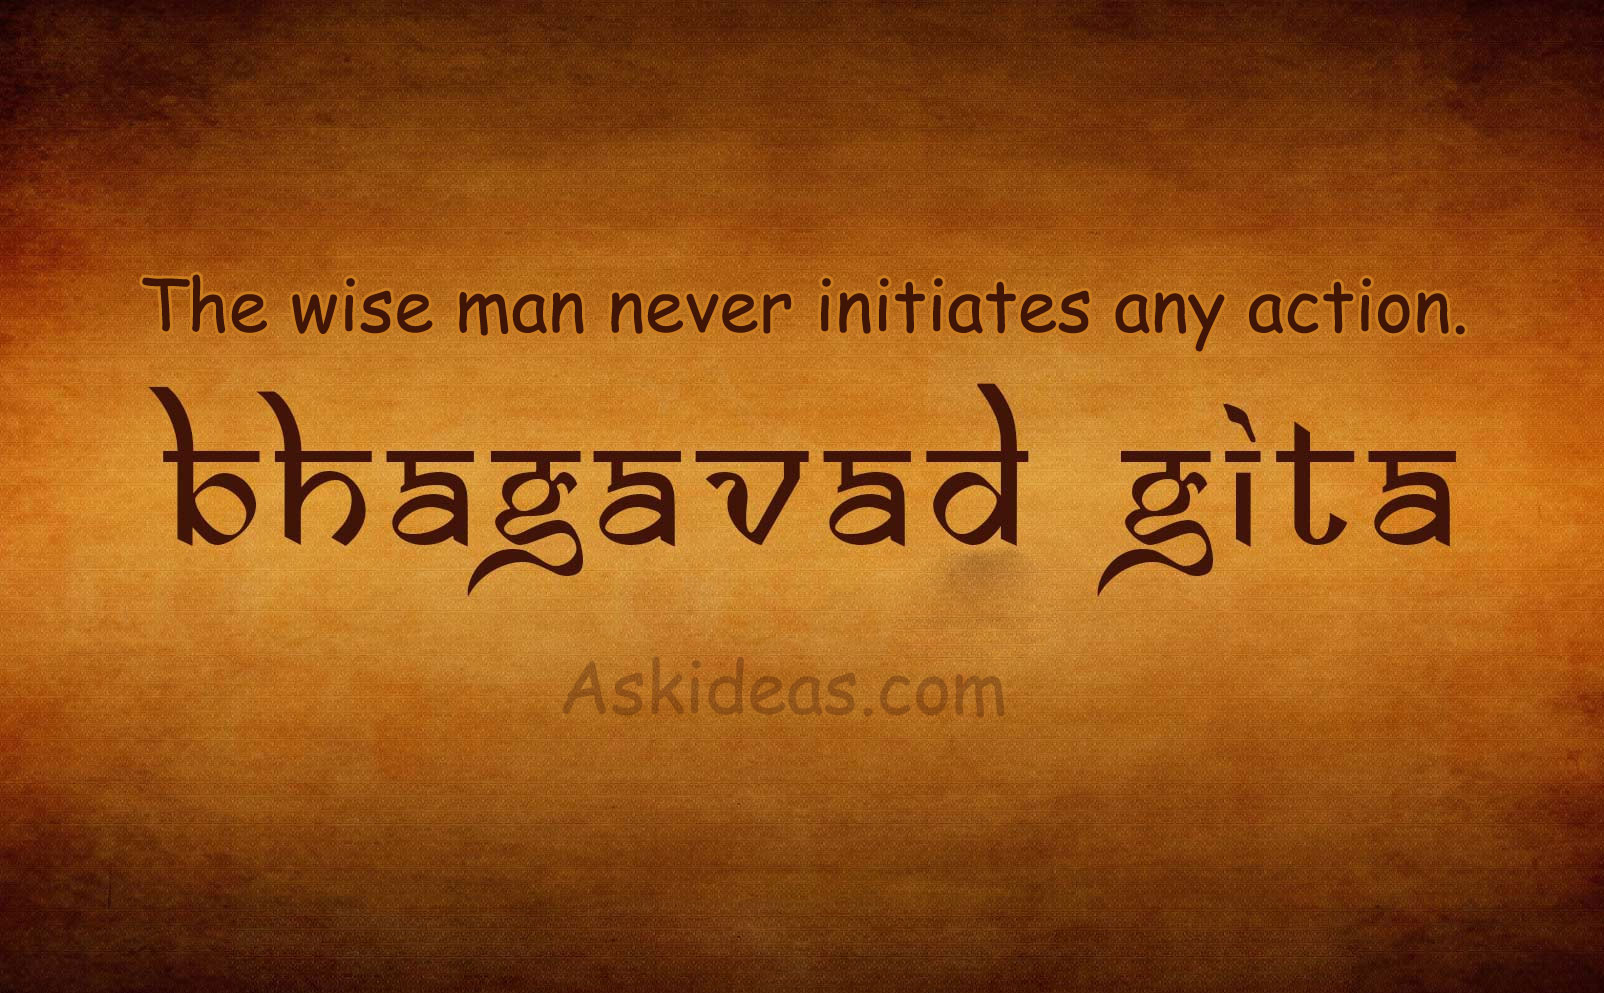 The wise man never initiates any action